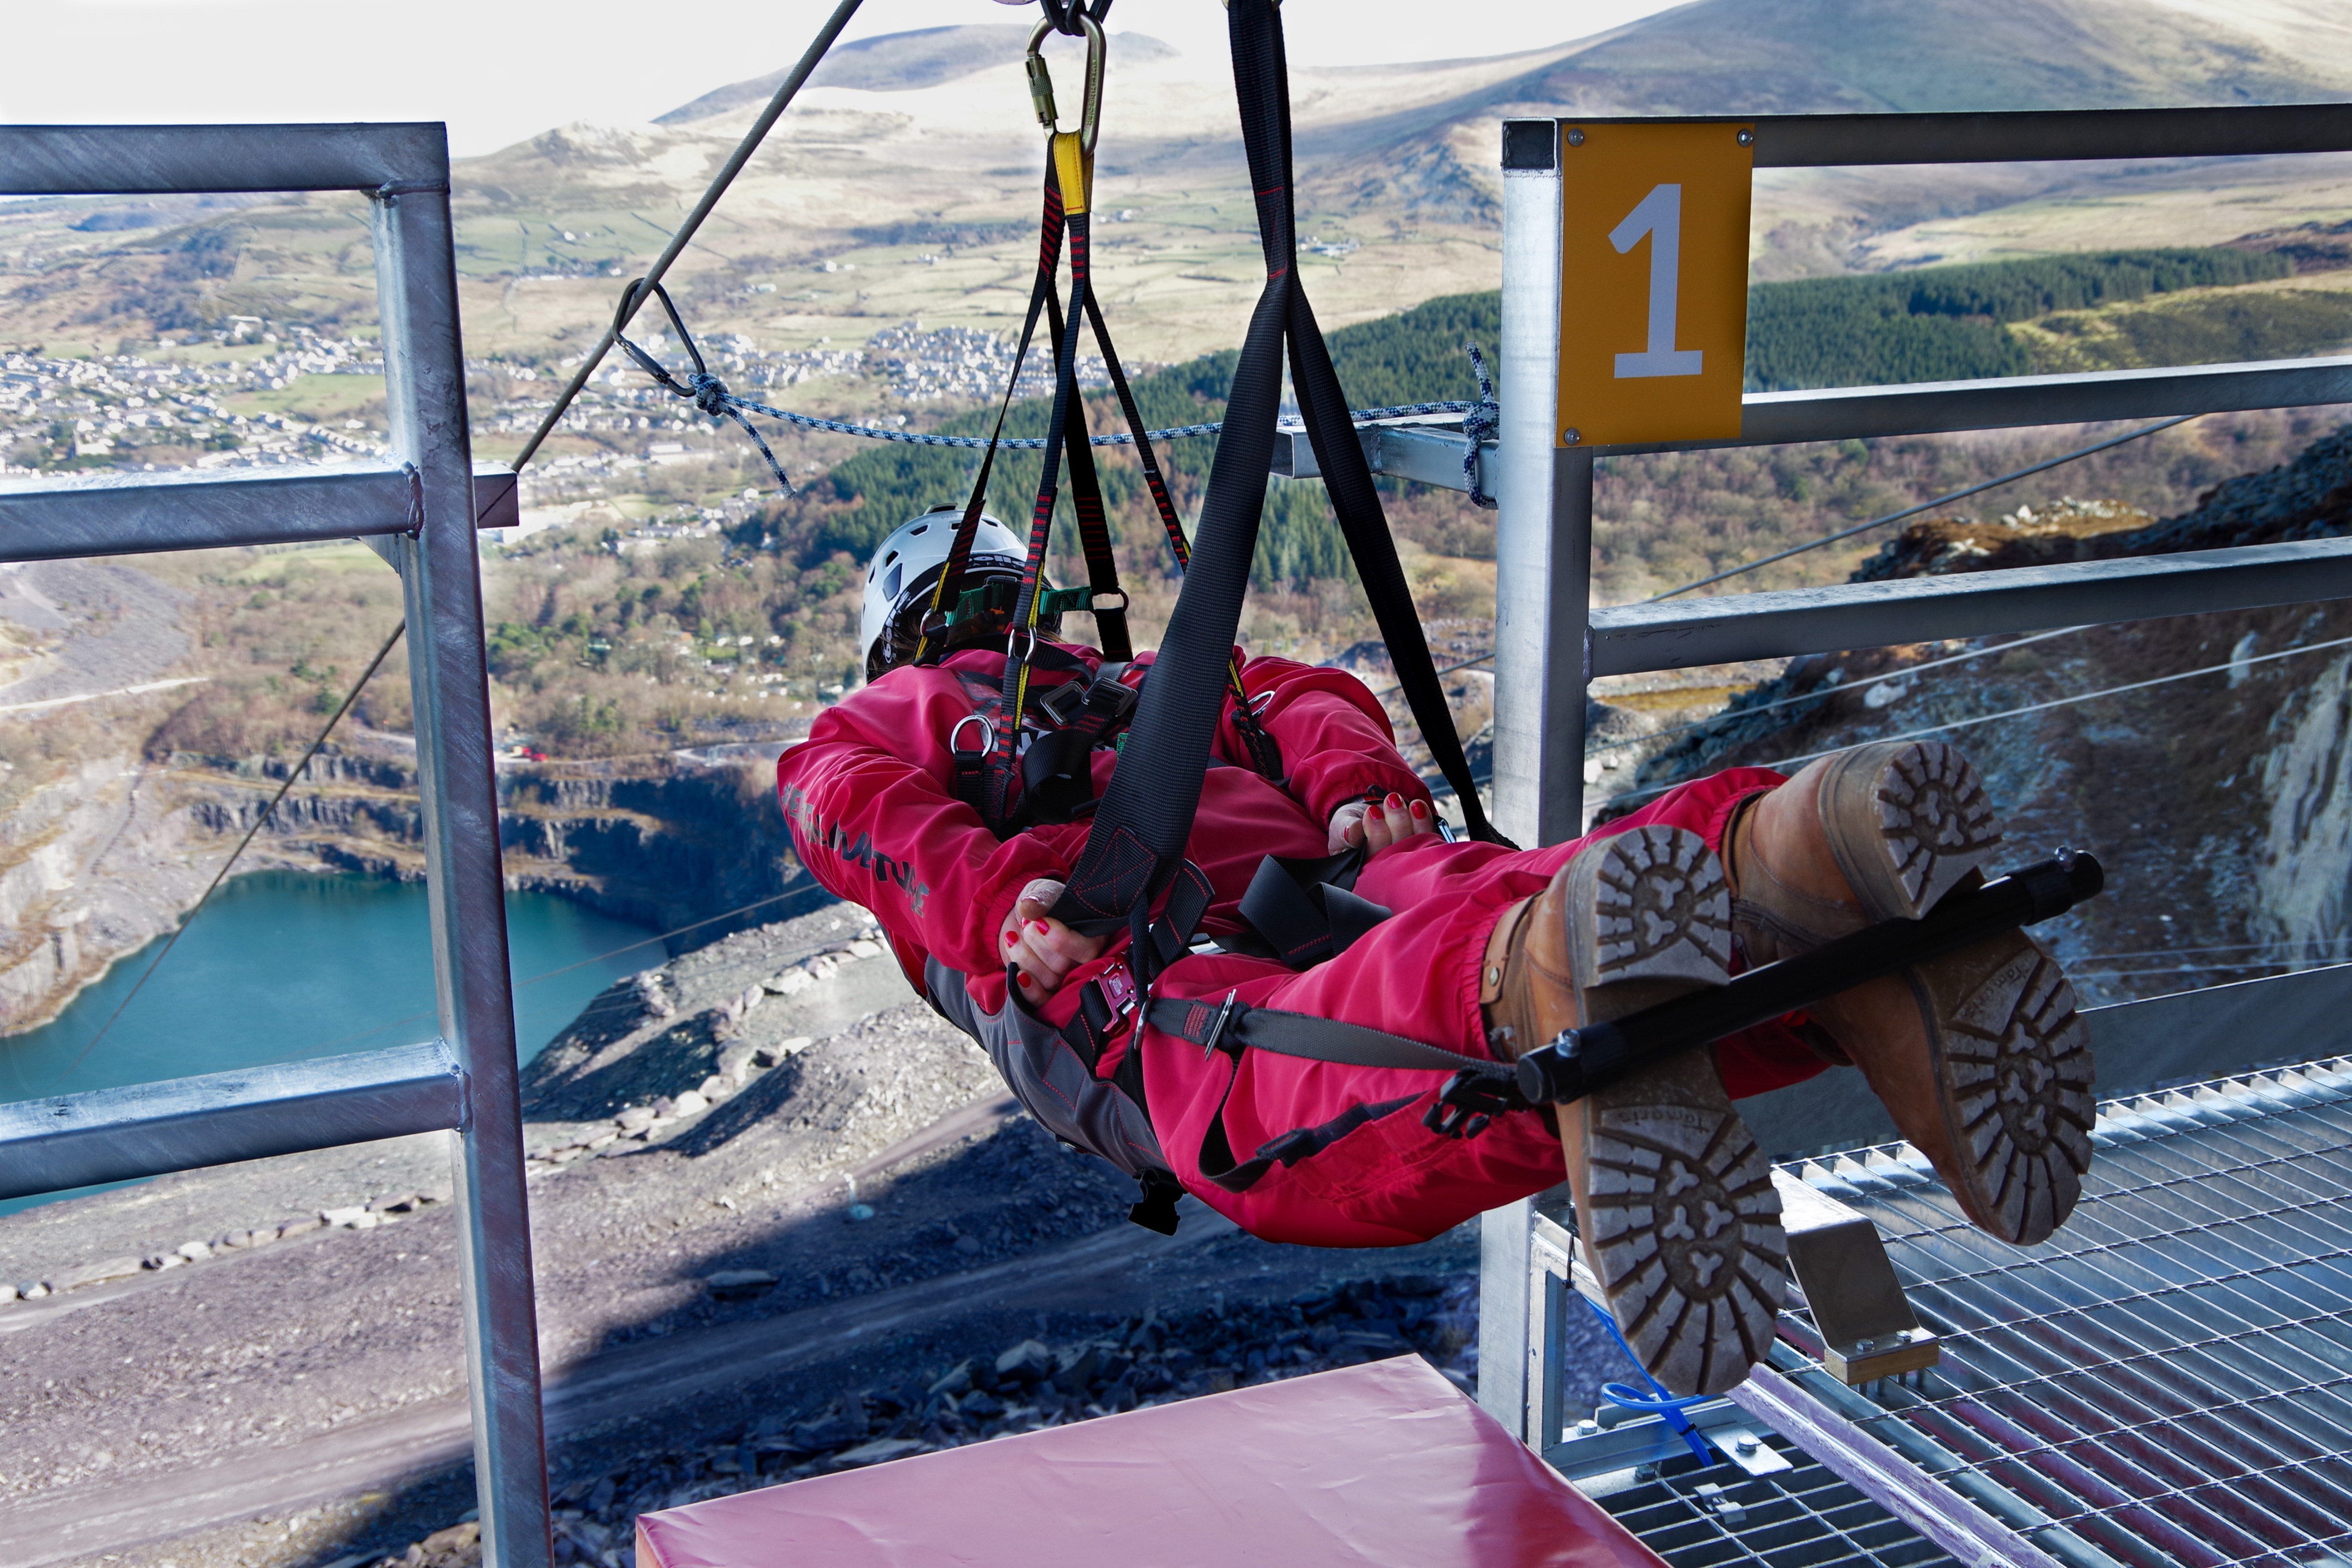 Velocity is the world’s fastest zip line